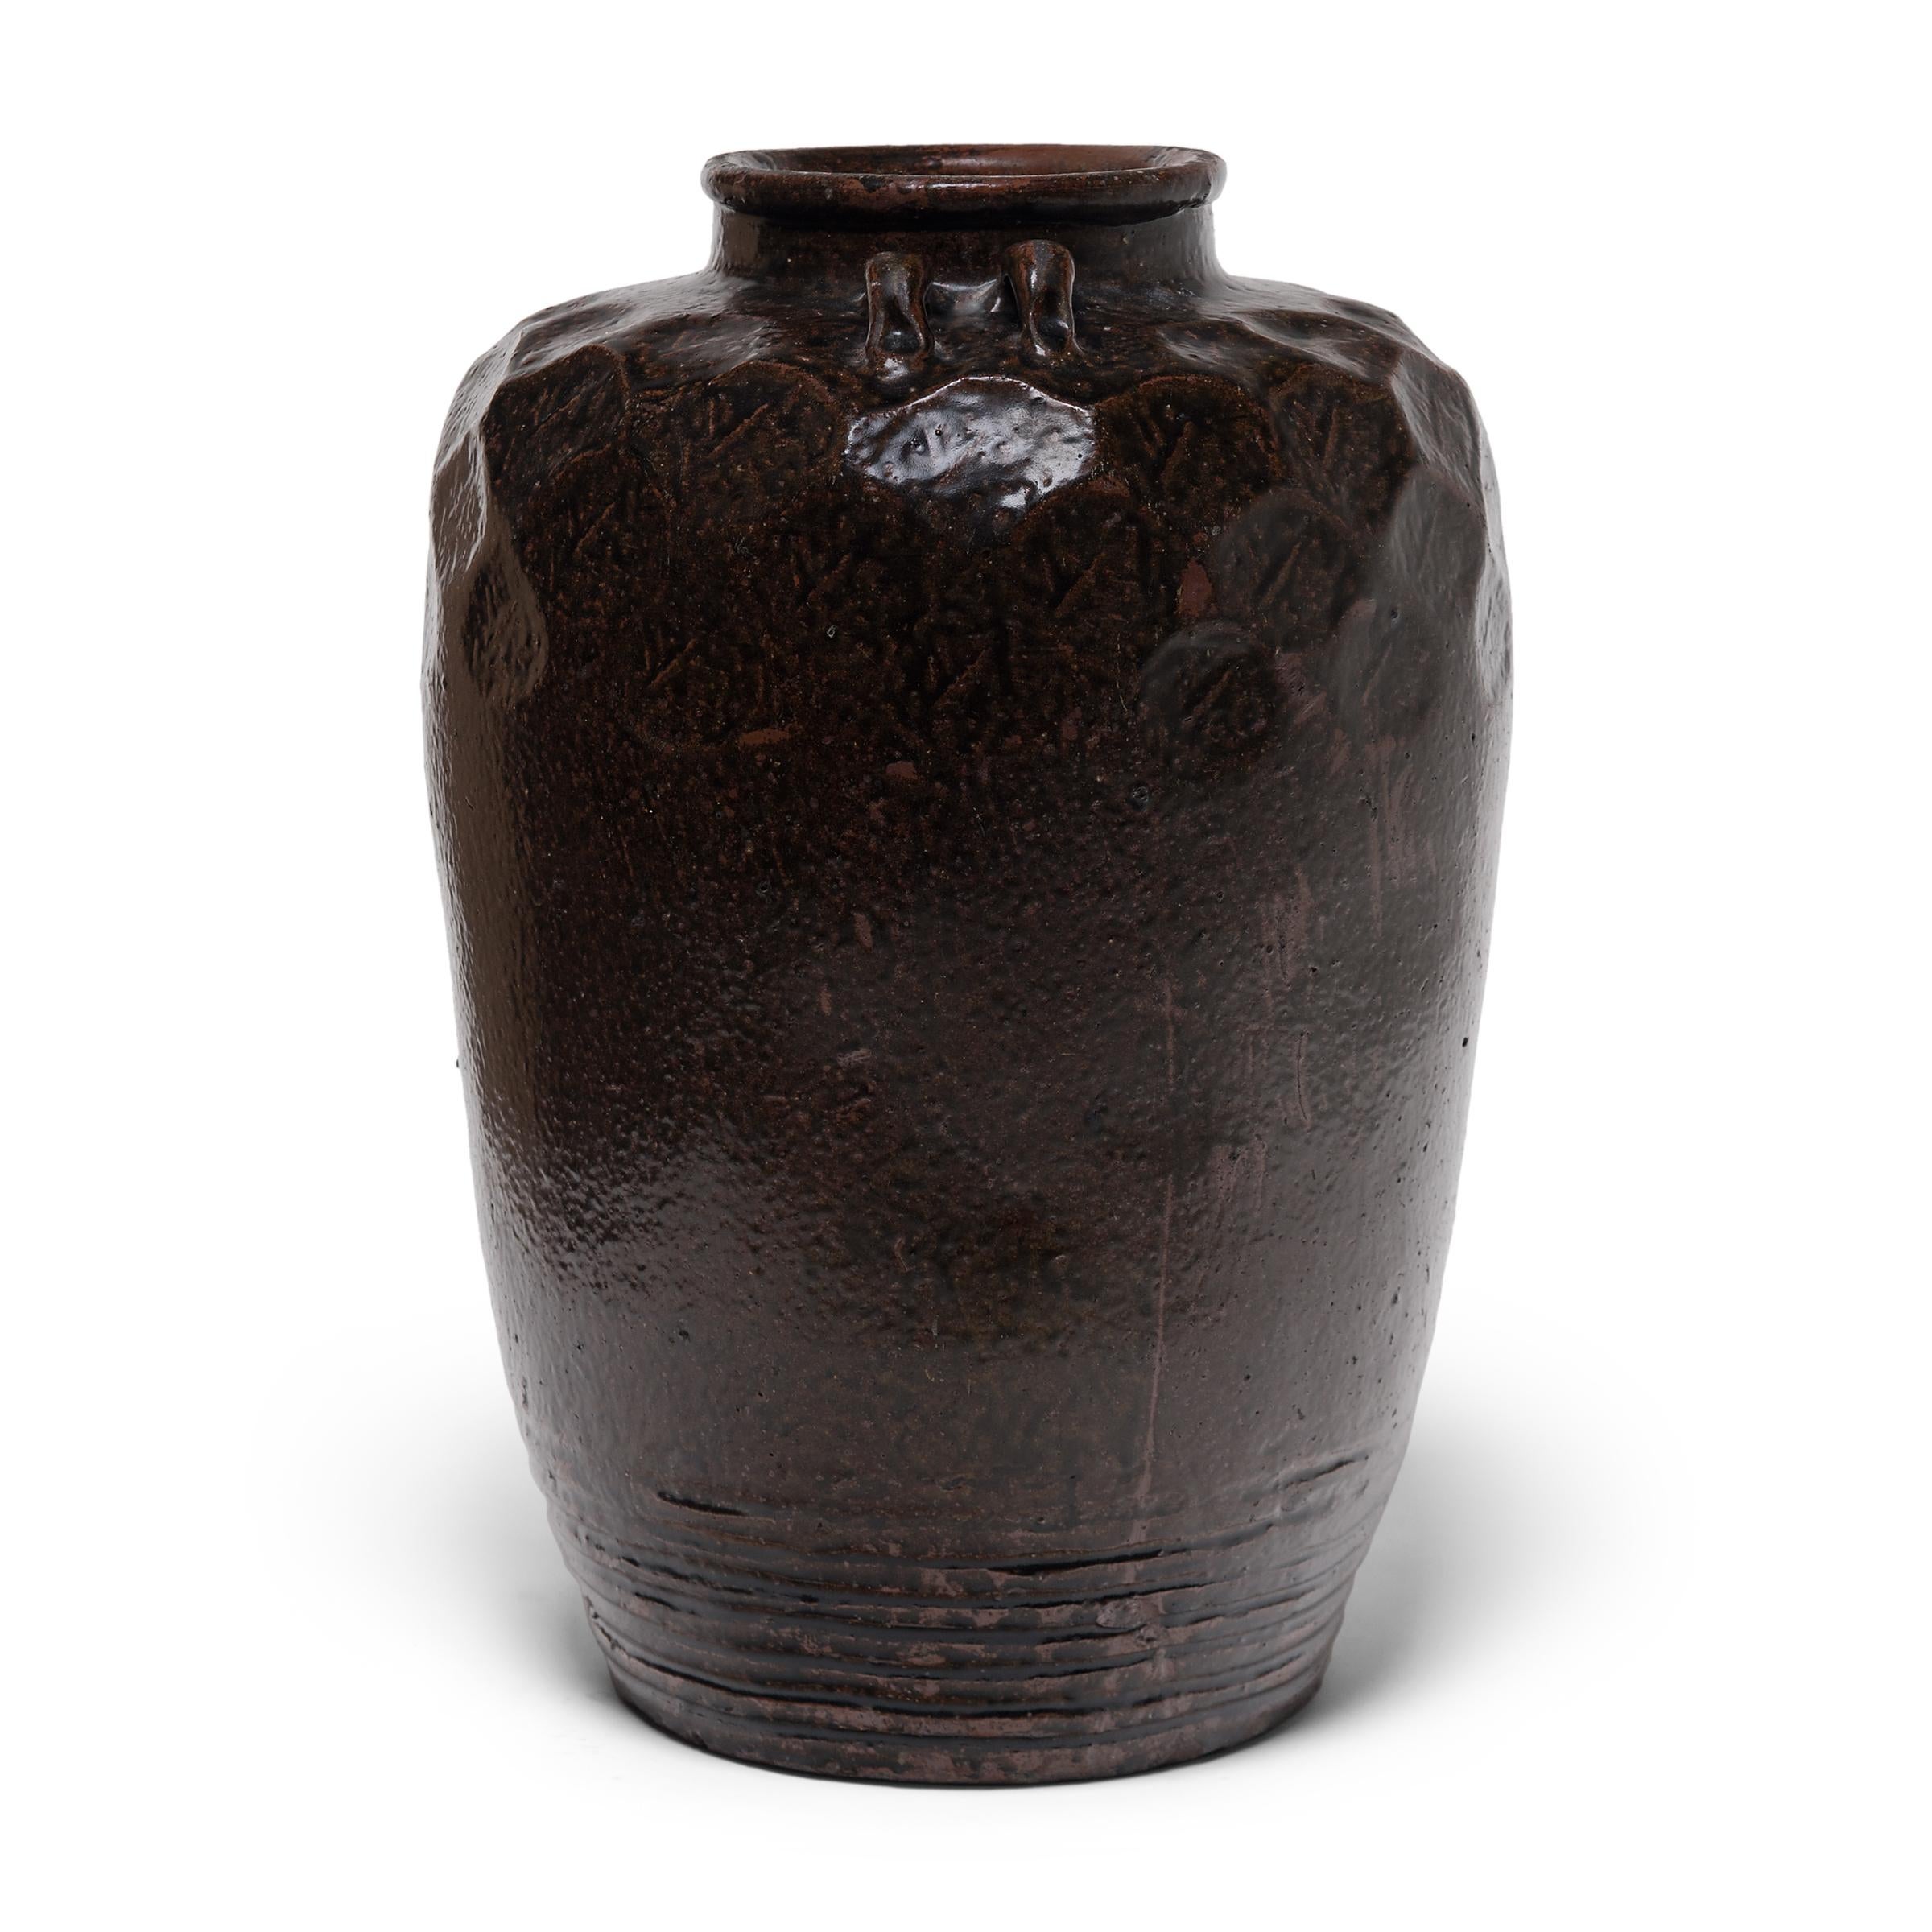 In Qing-dynasty China, large glazed jars such as this were used to store wines, foods, and other consumable items. The combination of high shoulders textured by an irregular, faceted surface and the subtle ridged texture along the sides gives the